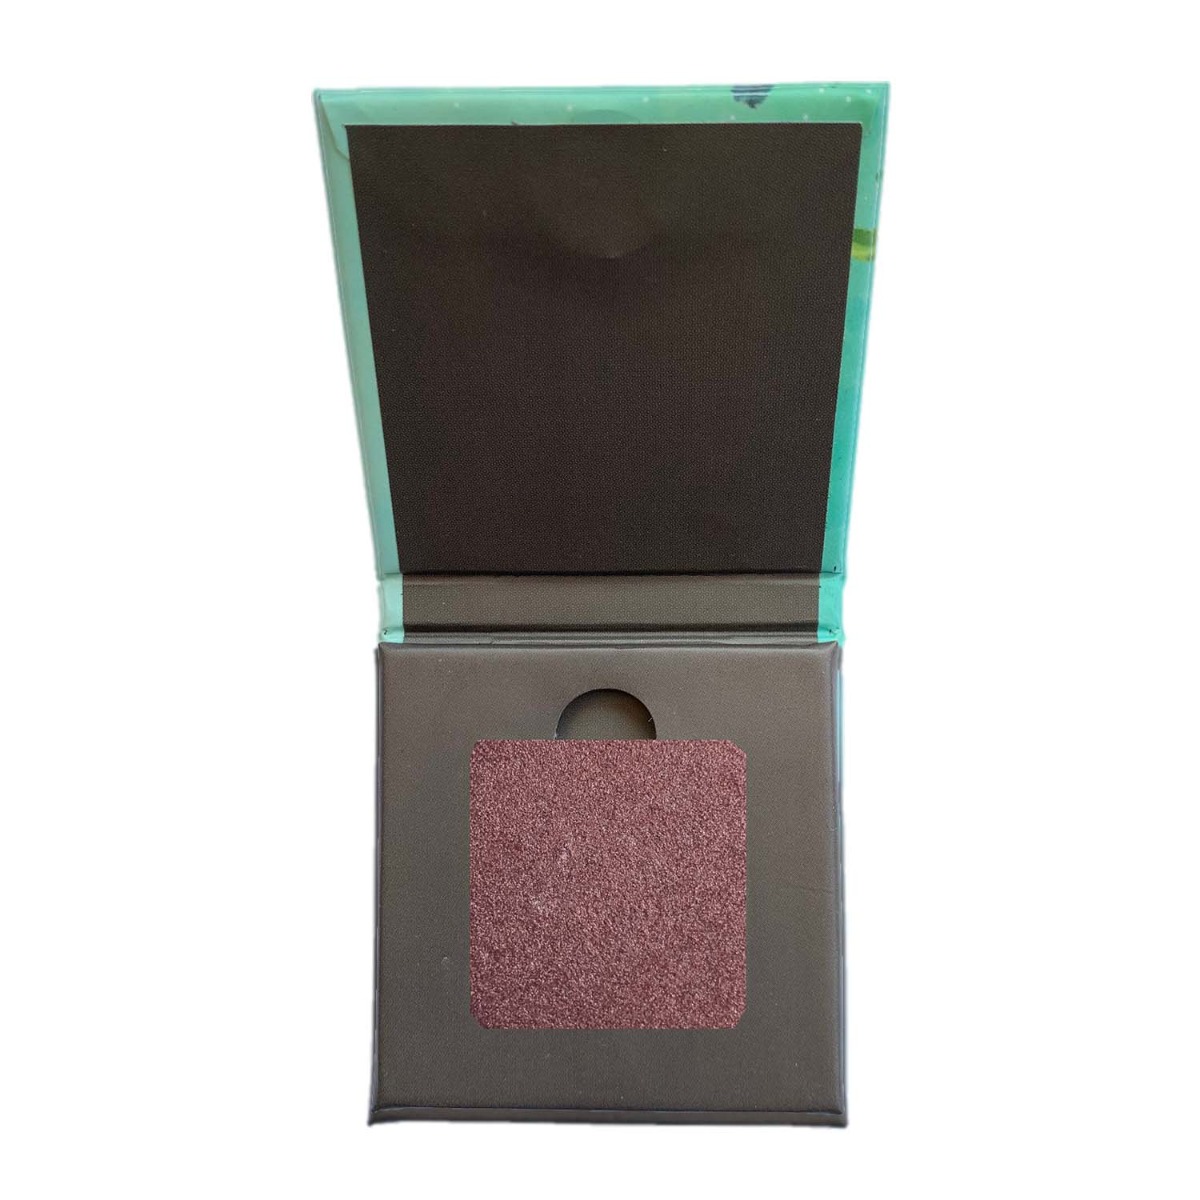 Disguise Cosmetics Satin Smooth Eyeshadow Squares - 209 Frosted Mauve Berry, 4.5gm